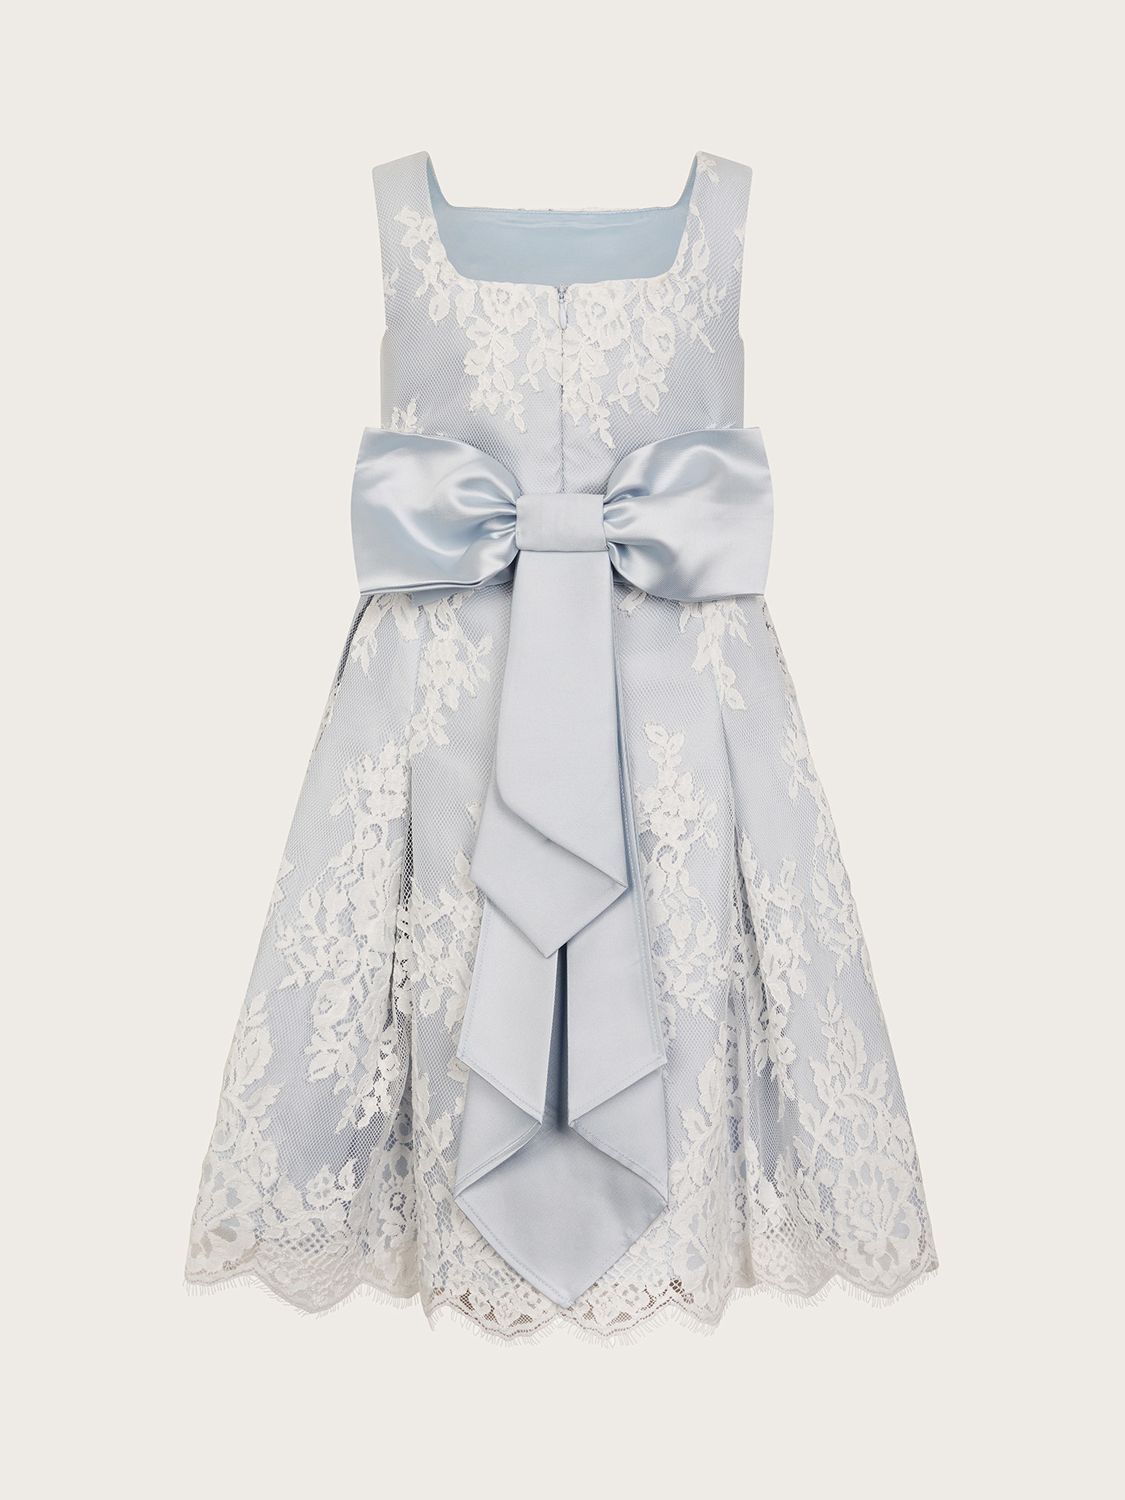 Monsoon Kids' Floral Lace Bow Detail Occasion Dress, Pale Blue, 14-15 years